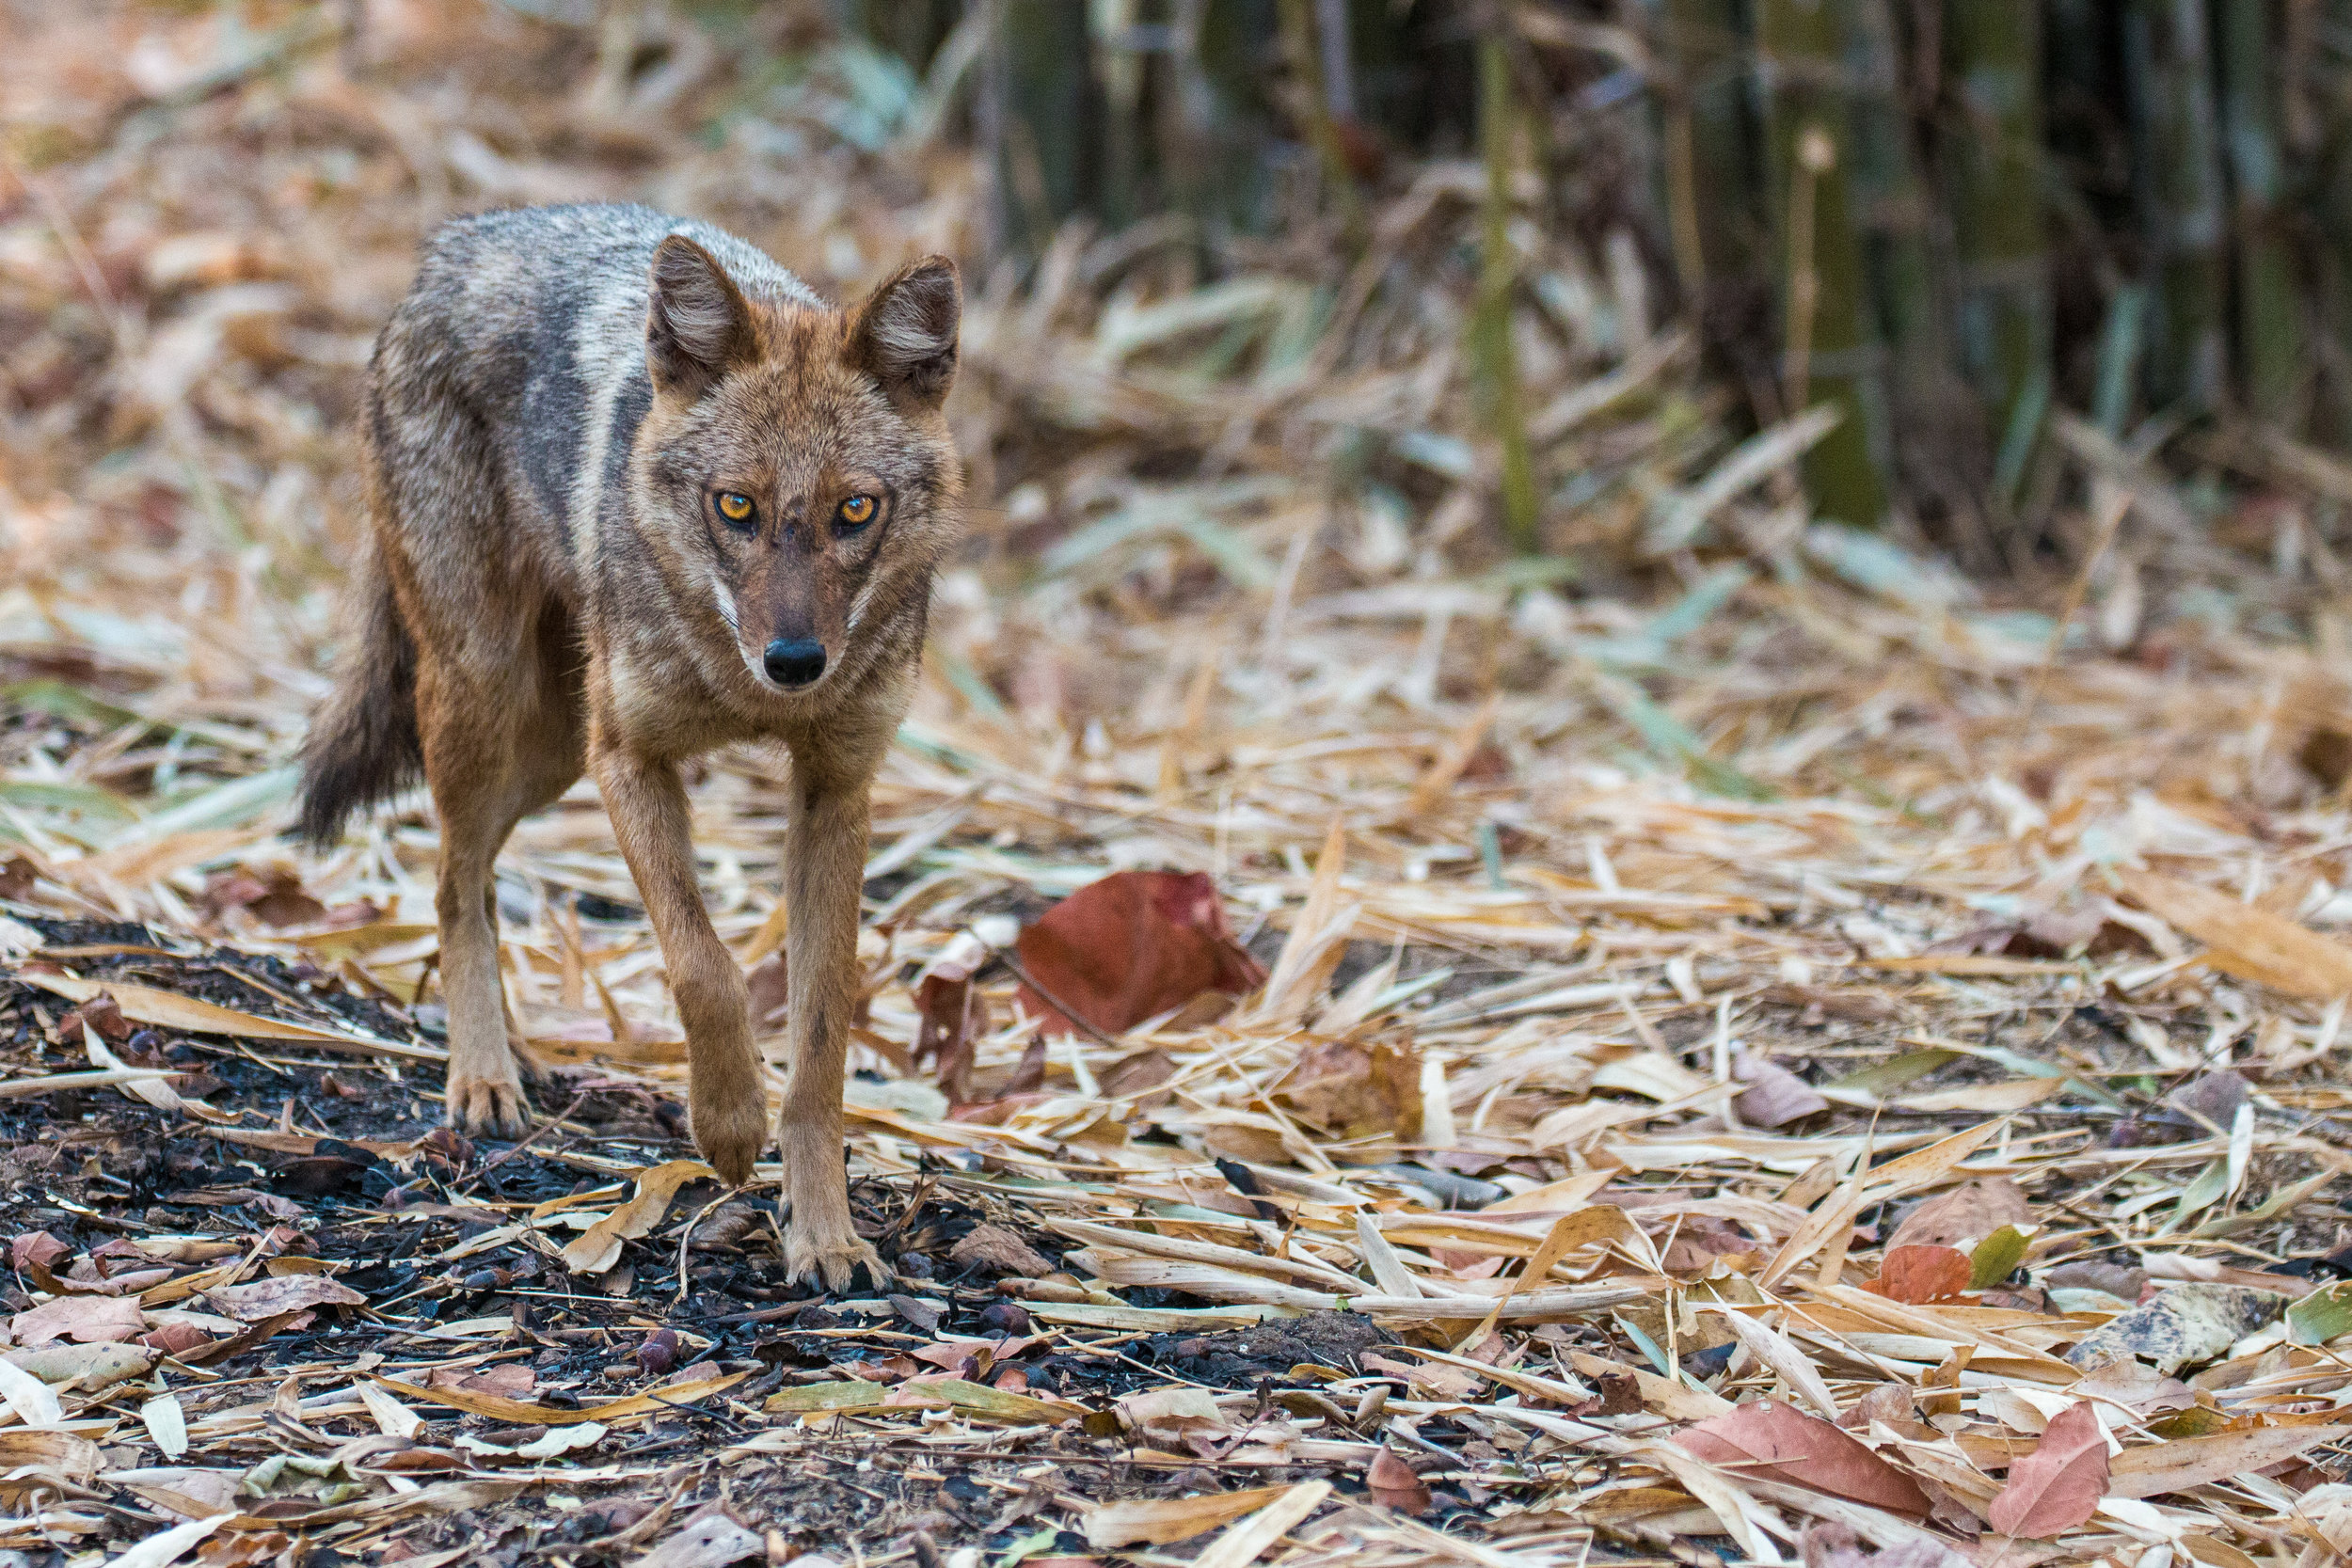 Jackal on the prowl in the early morning light.